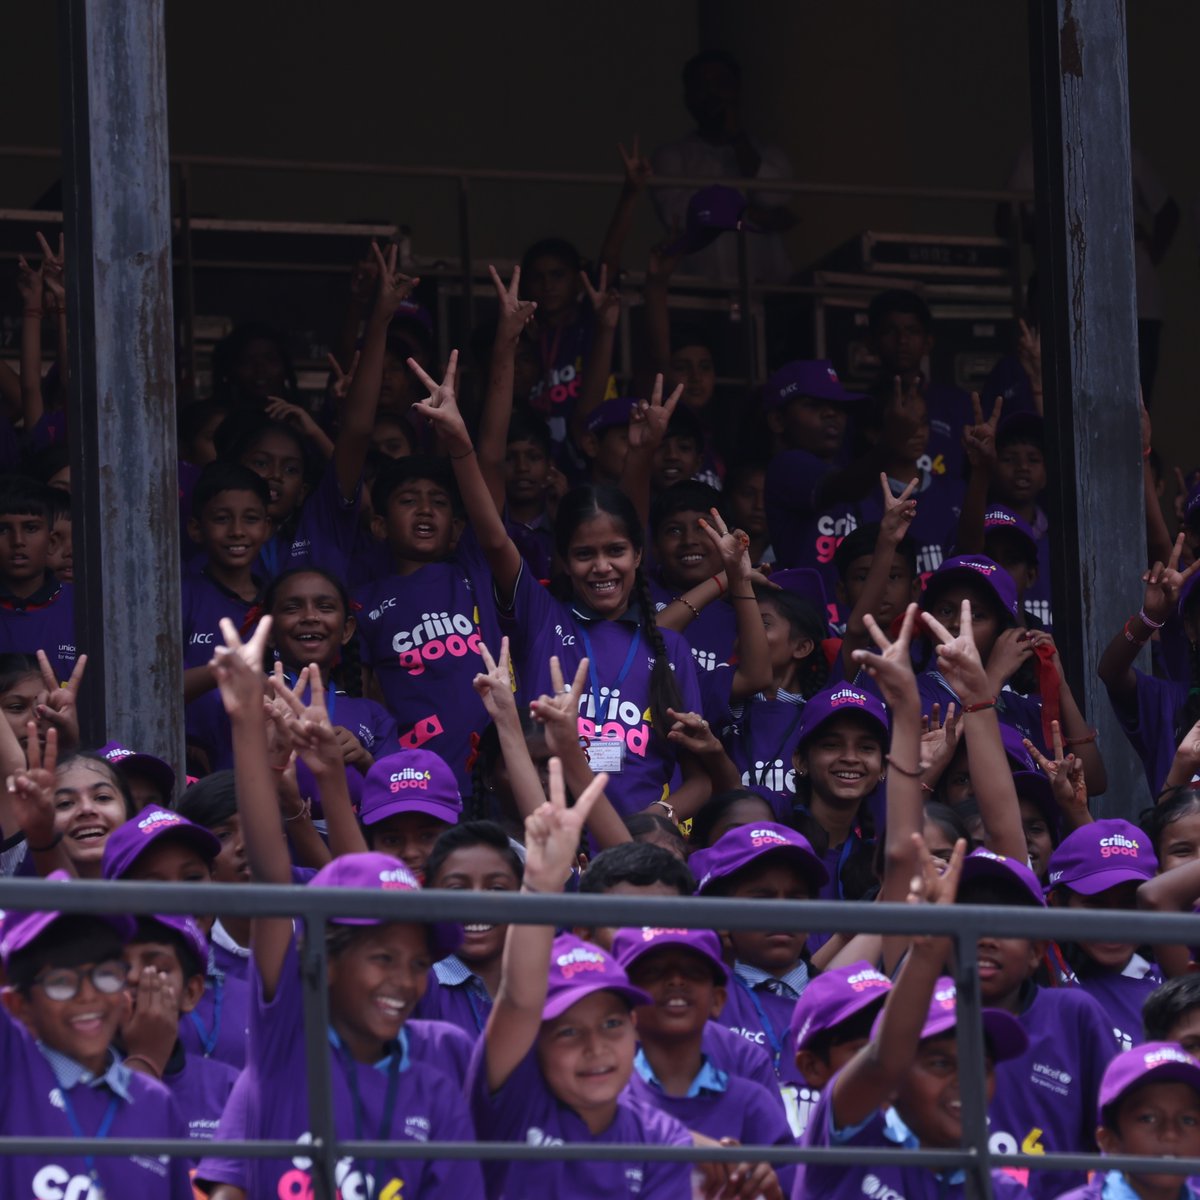 Championing the right lessons #ForEveryChild. @ICC, @BCCI, @EduMinOfIndia and UNICEF India, along with Indian Cricketer, @mandhana_smriti and over 1,000 children today launched #Criiio4Good, a new online, life skills learning course, to promote gender equity among girls and…